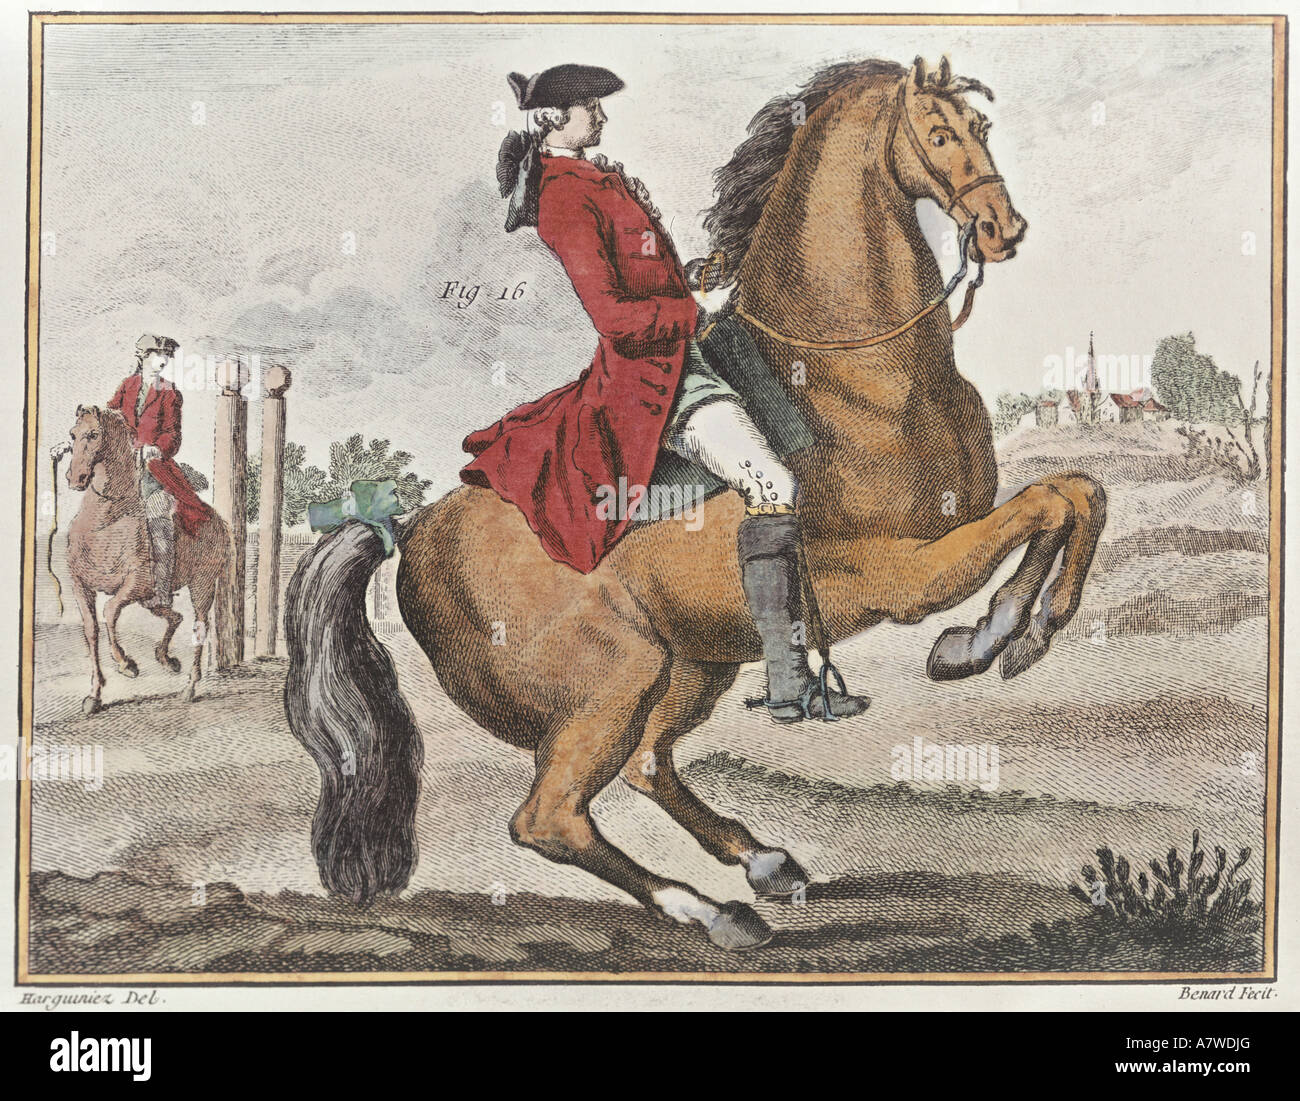 sport, equestrial sport, horse riding, dressage, levade, coloured engraving by Bernard, "Encyclopedie ou Dictionnaire raisonne des sciences arts et des metieres", edited by Denis Diderot and Jean Baptiste dS  Alembert, Paris 1751 - 1772, private collection, , Artist's Copyright has not to be cleared Stock Photo